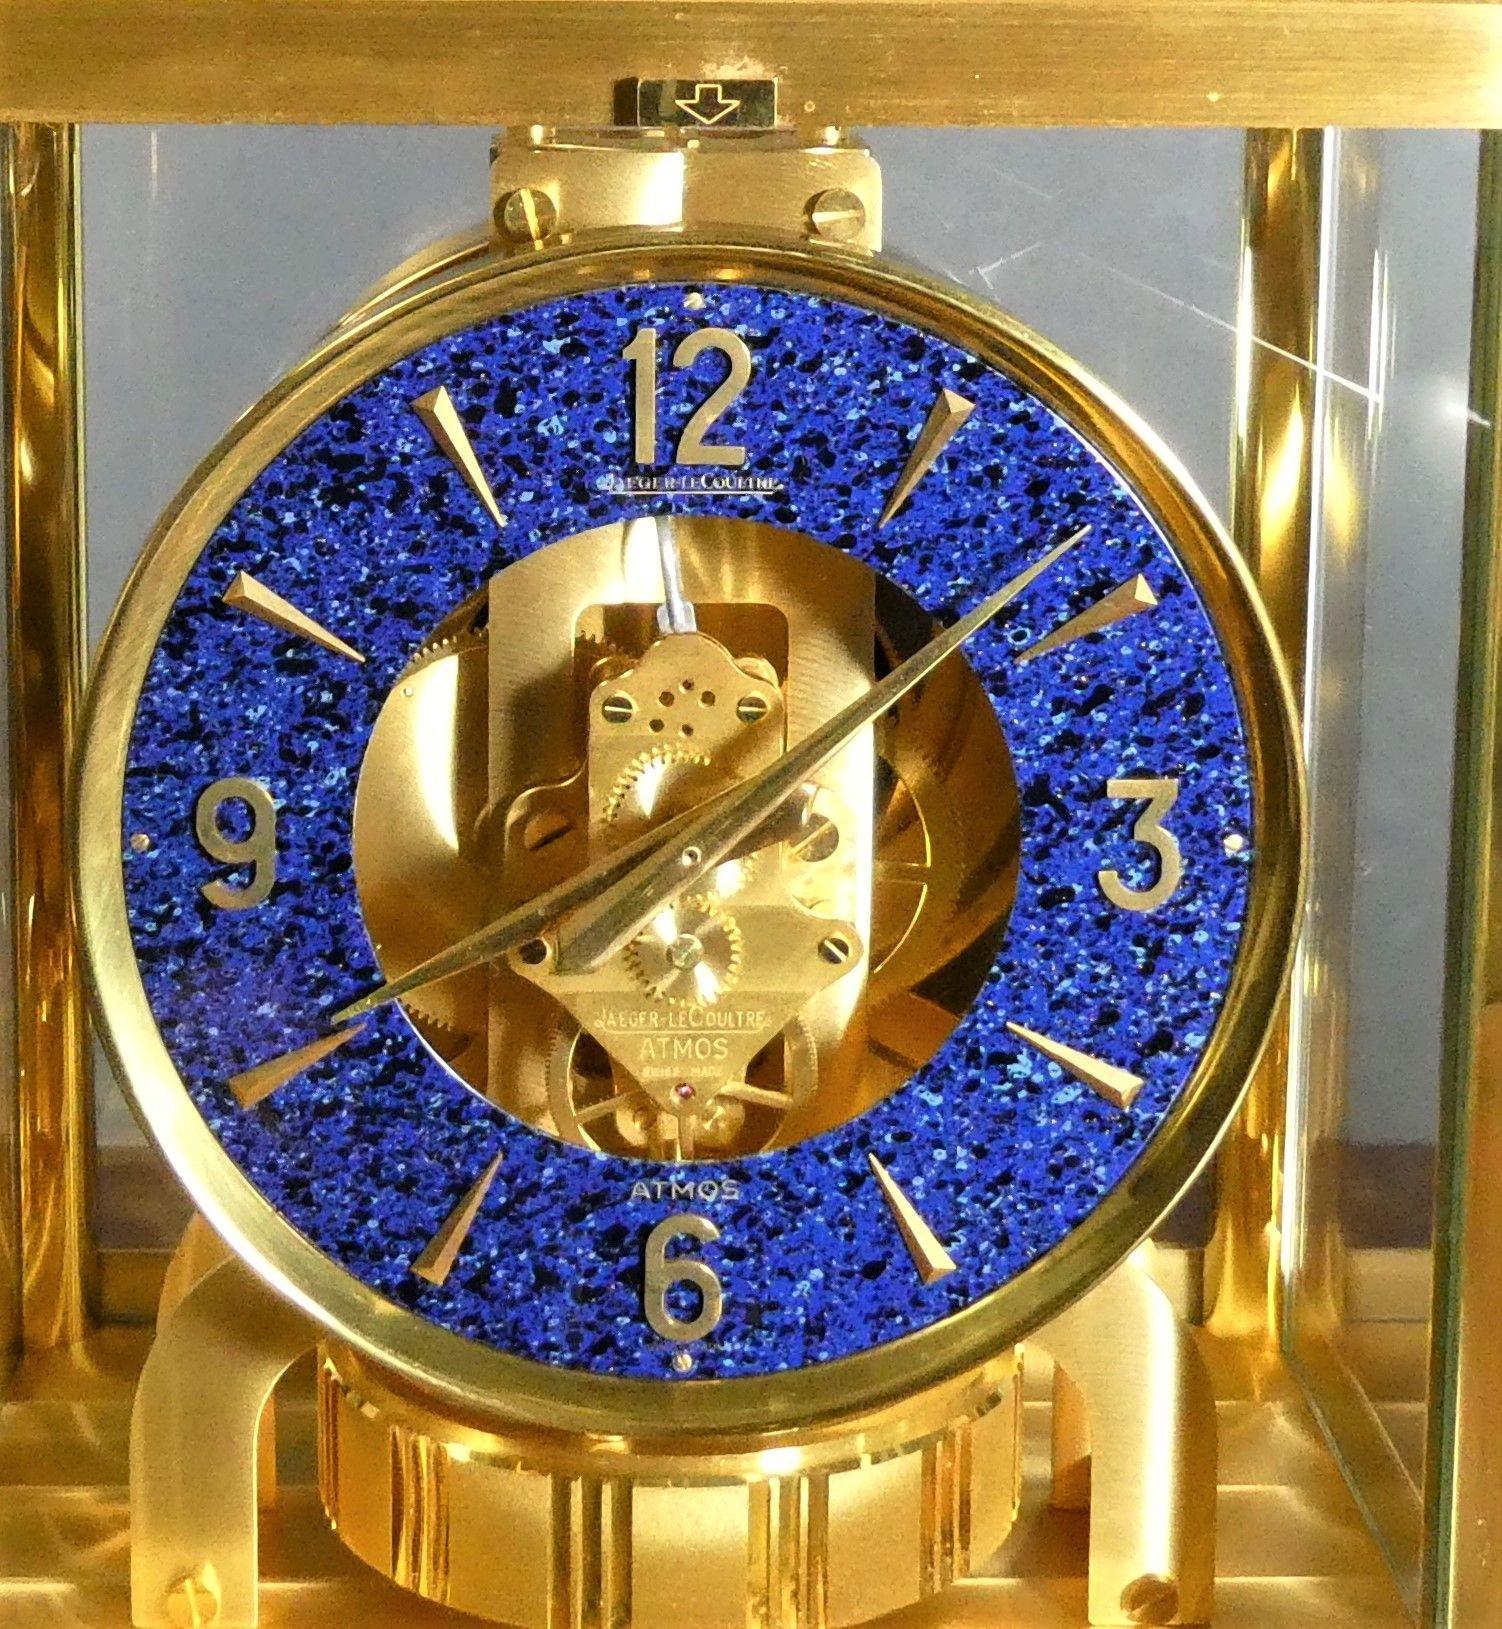 Jaeger -Le – Coultre atmos clock with lapis lazuli dial
 
Gold plated Atmos clock with ‘Lapis Lazuli’ dial, Arabic and baton numerals, original gold plated hands and signed Jaeger-Le-Coultre, Atmos.
Brushed gold plated case, ruby jewelled